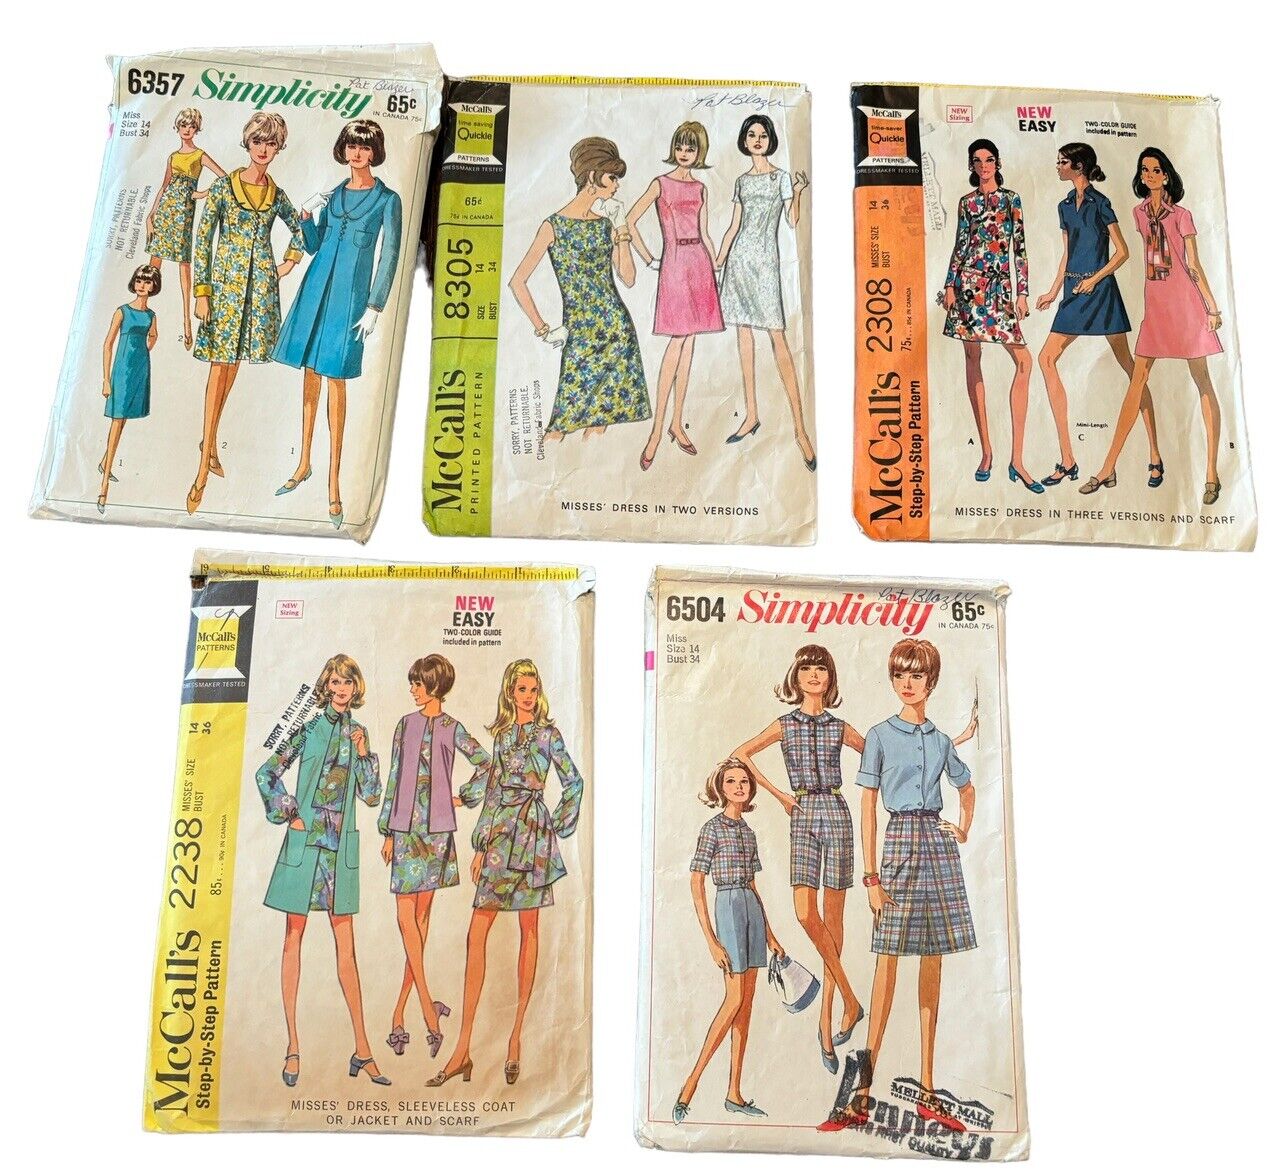 Vintage Simplicity McCall Sewing Pattern Lot Miss Sz 14 60's Retro Clothing Cut